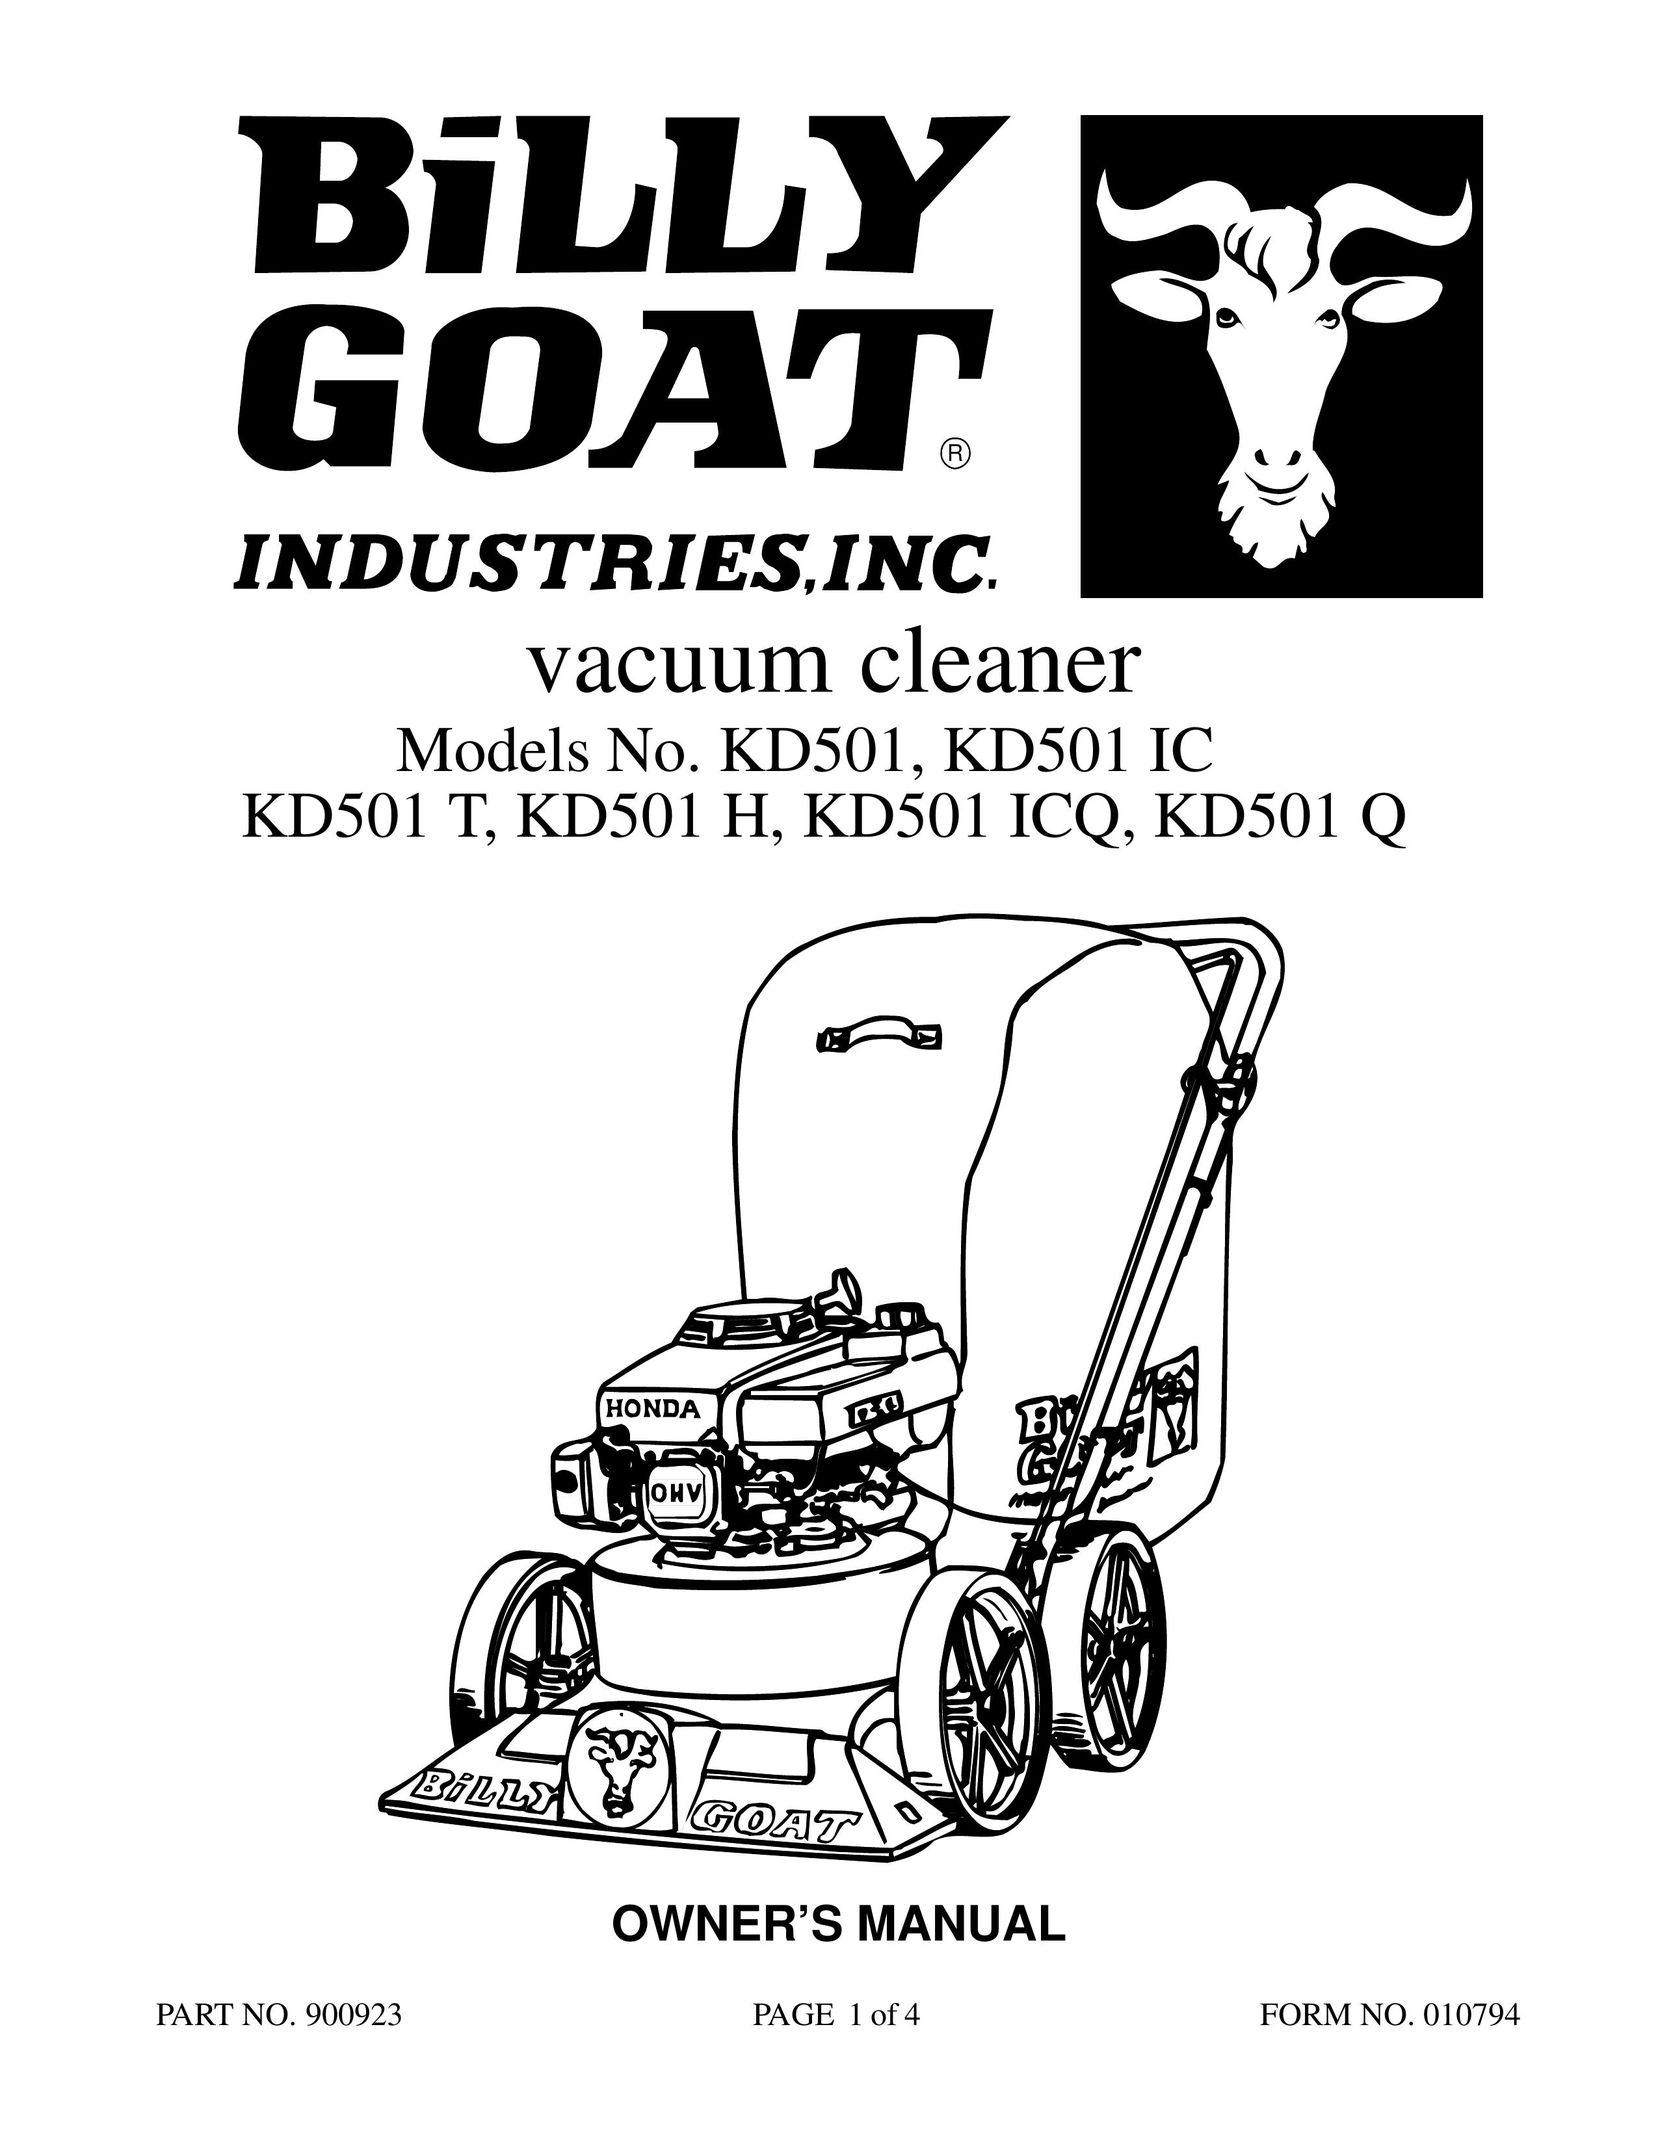 Billy Goat KD501 IC Vacuum Cleaner User Manual